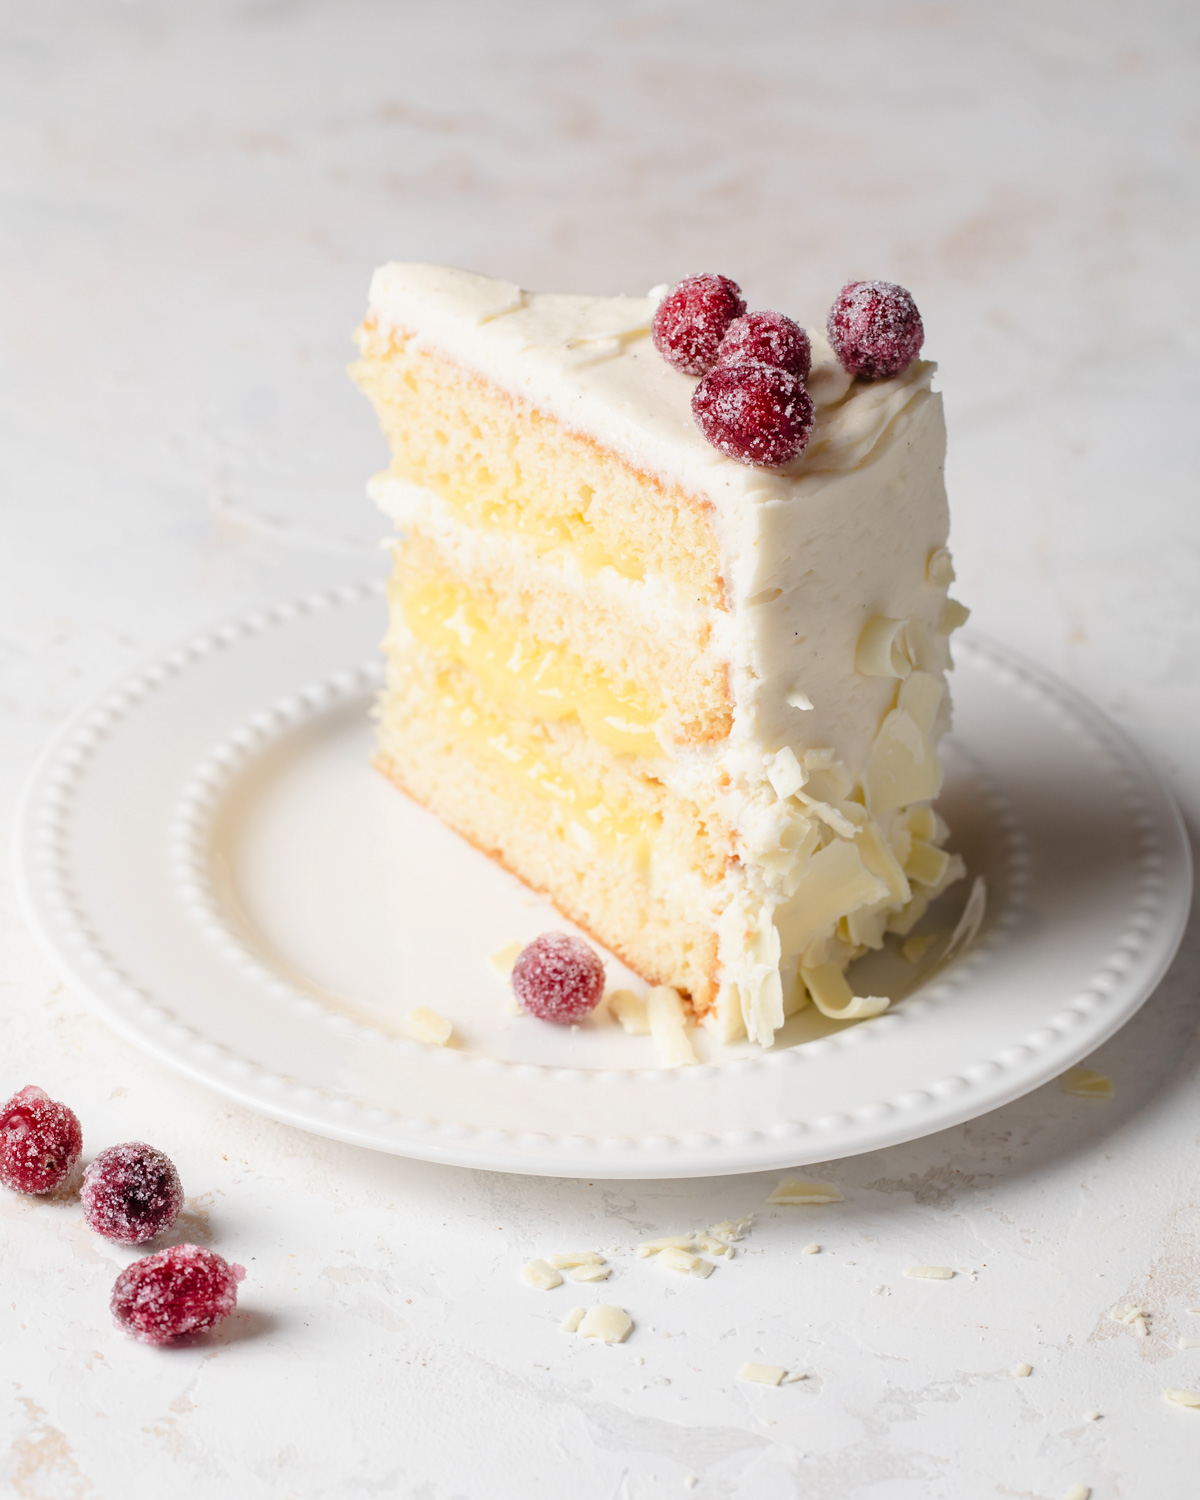 A slice of lemon layer cake with white chocolate curls on the outside